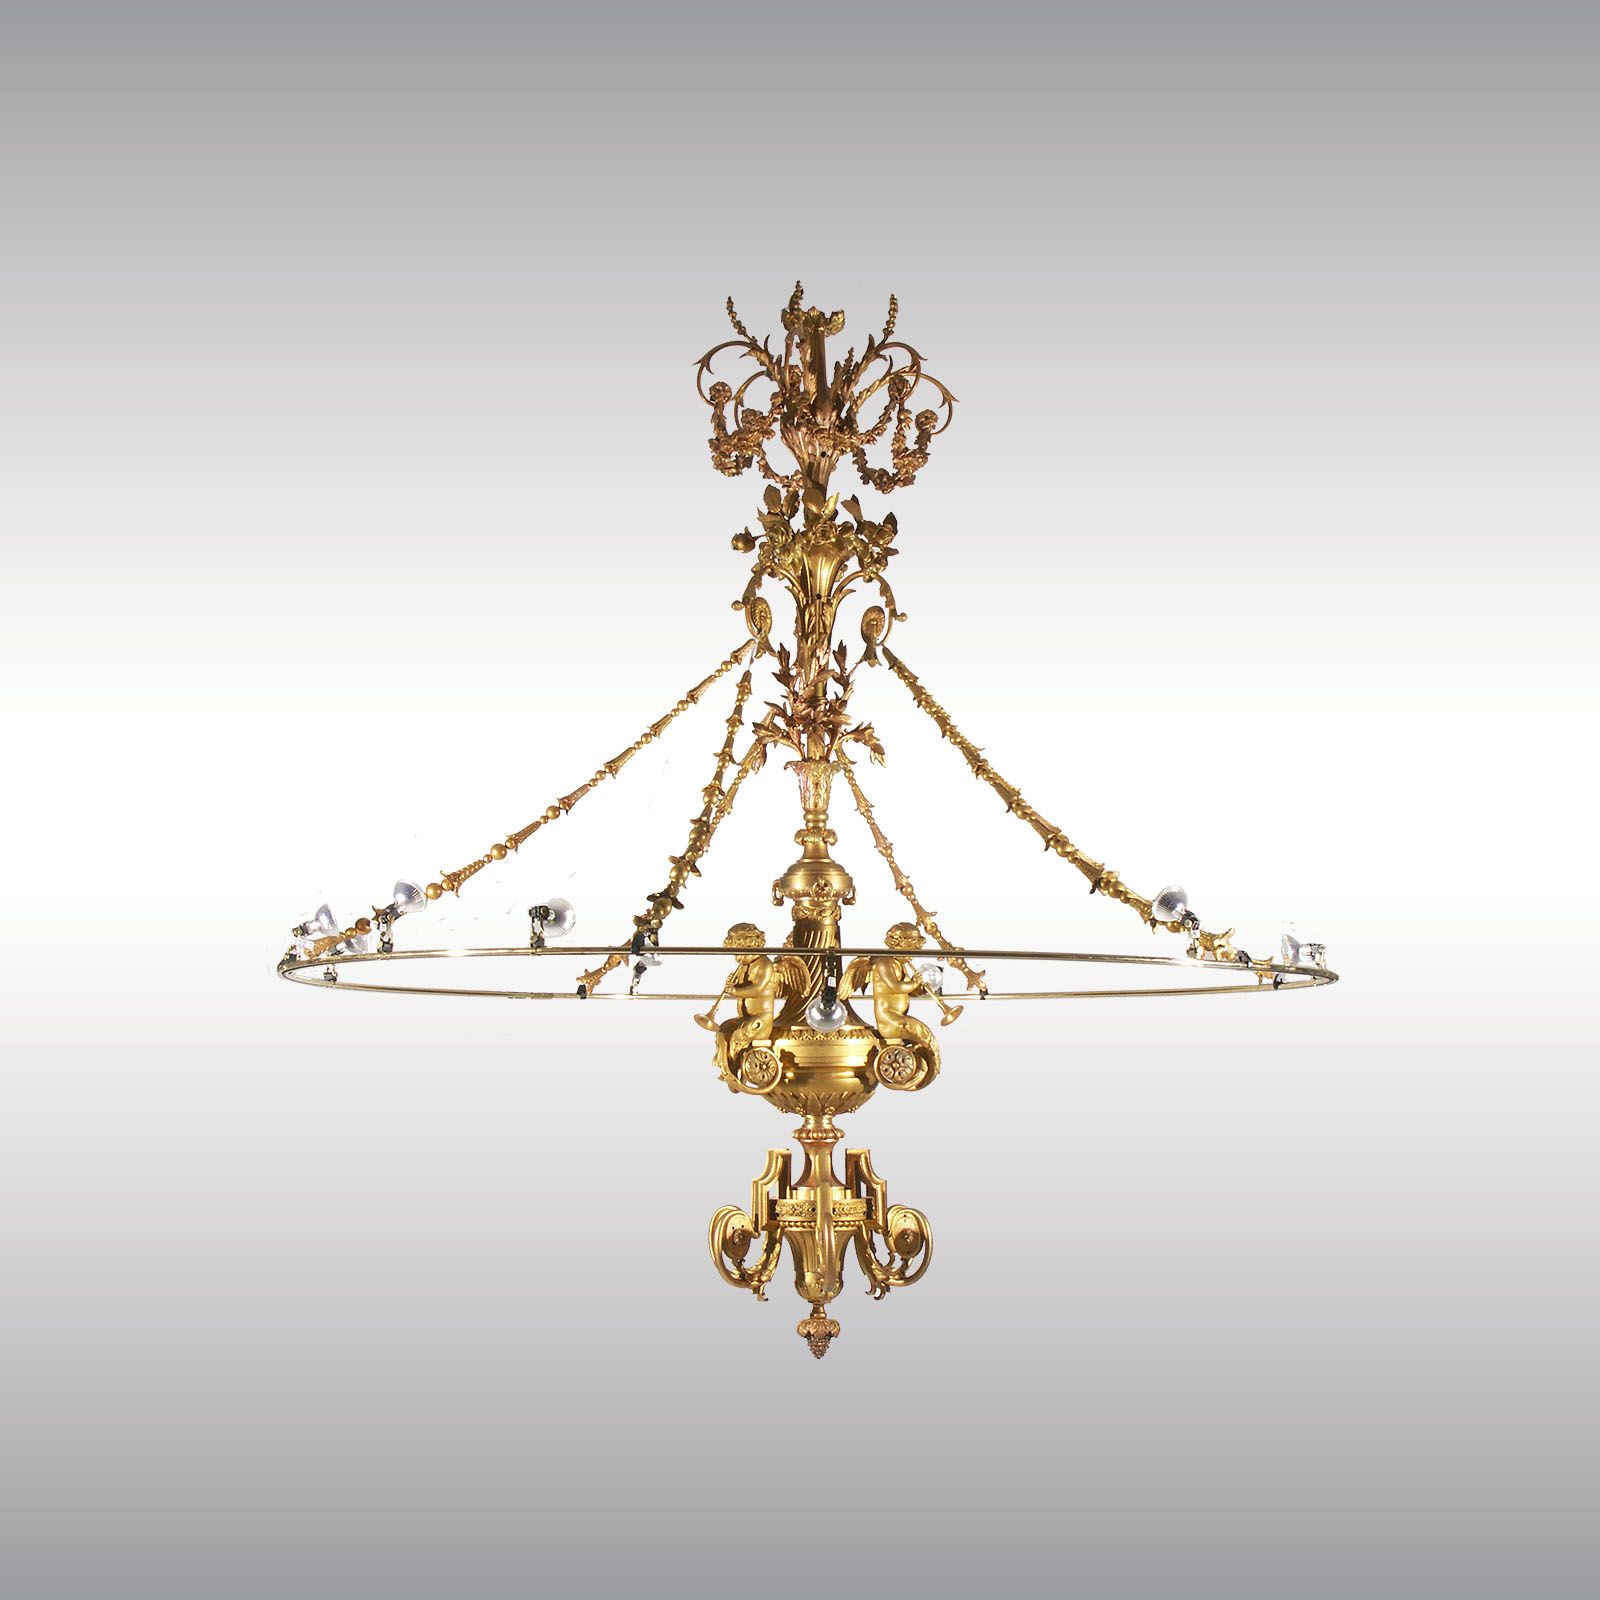 WOKA LAMPS VIENNA - OrderNr.: 60002|The Ring - Column of a Ringstrasse Chandelier - Design: The Ringstrasse-Style in Vienna